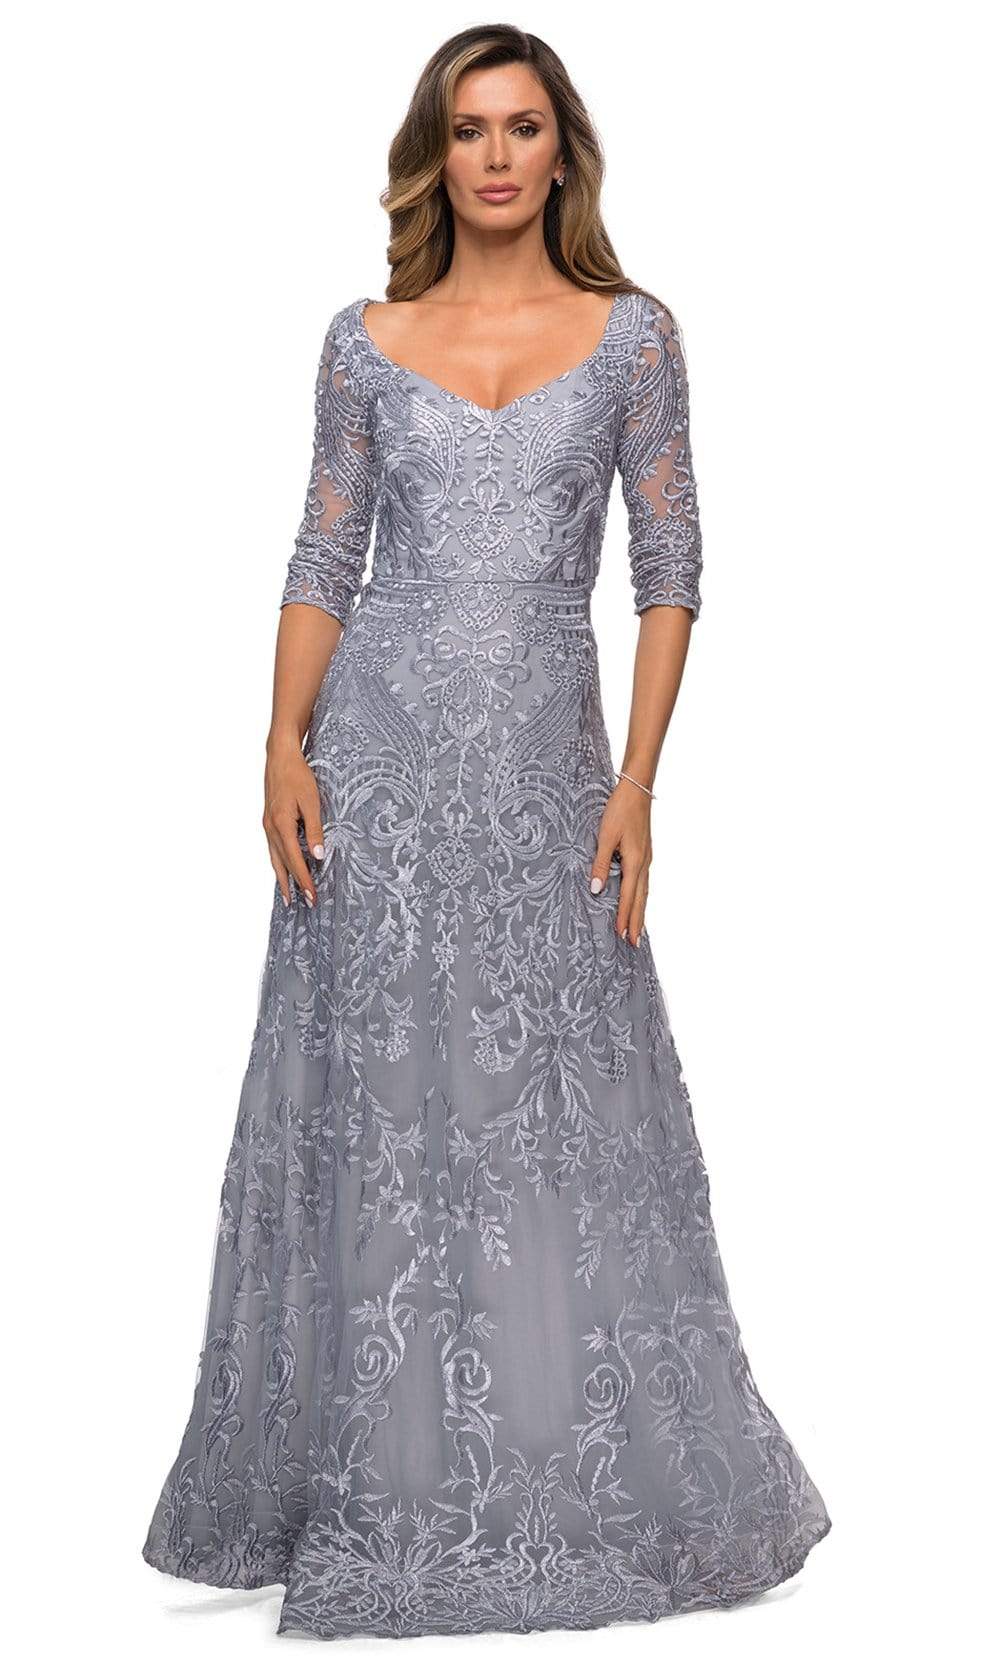 La Femme - 27949 Embroidered Lace Overlay A-Line Gown Mother of the Bride Dresses 4 / Silver